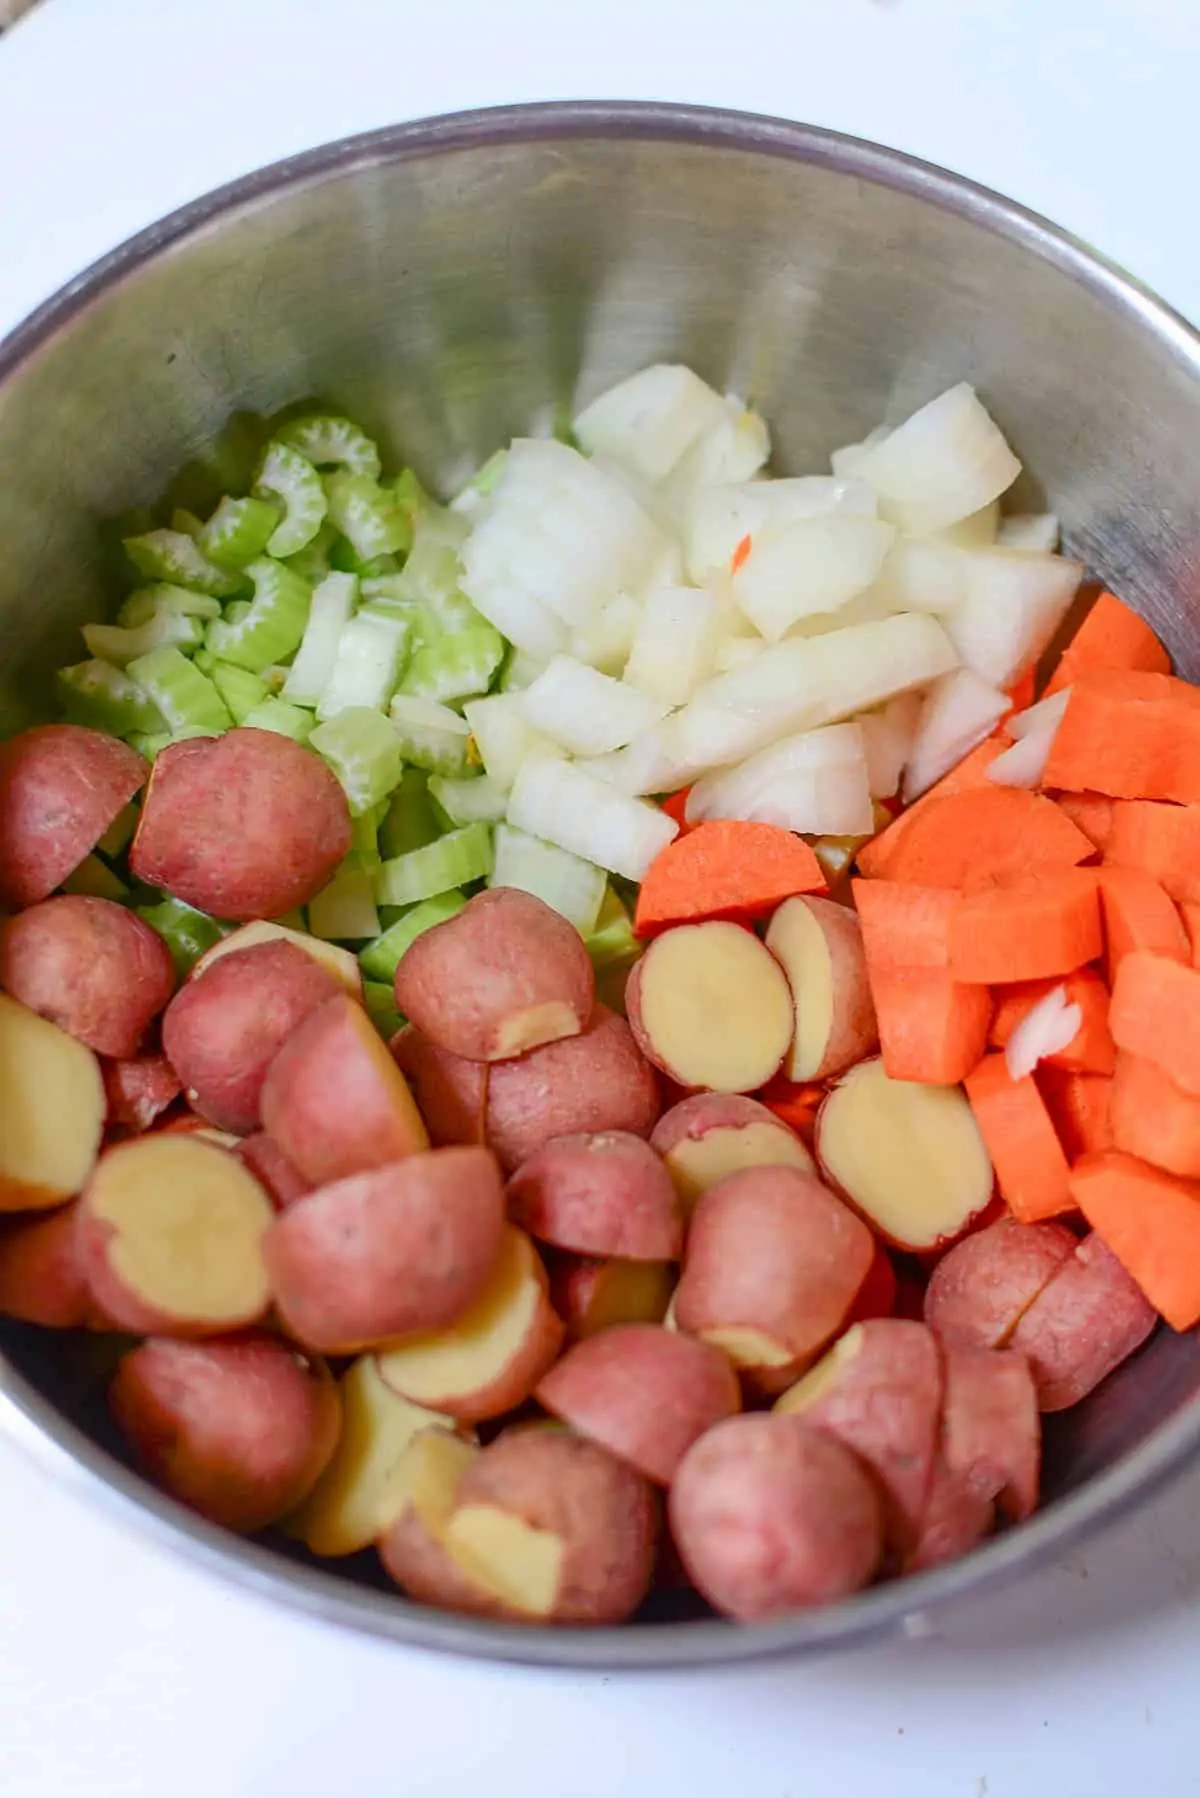 The vegetables going into the stew in a silver bowl. 